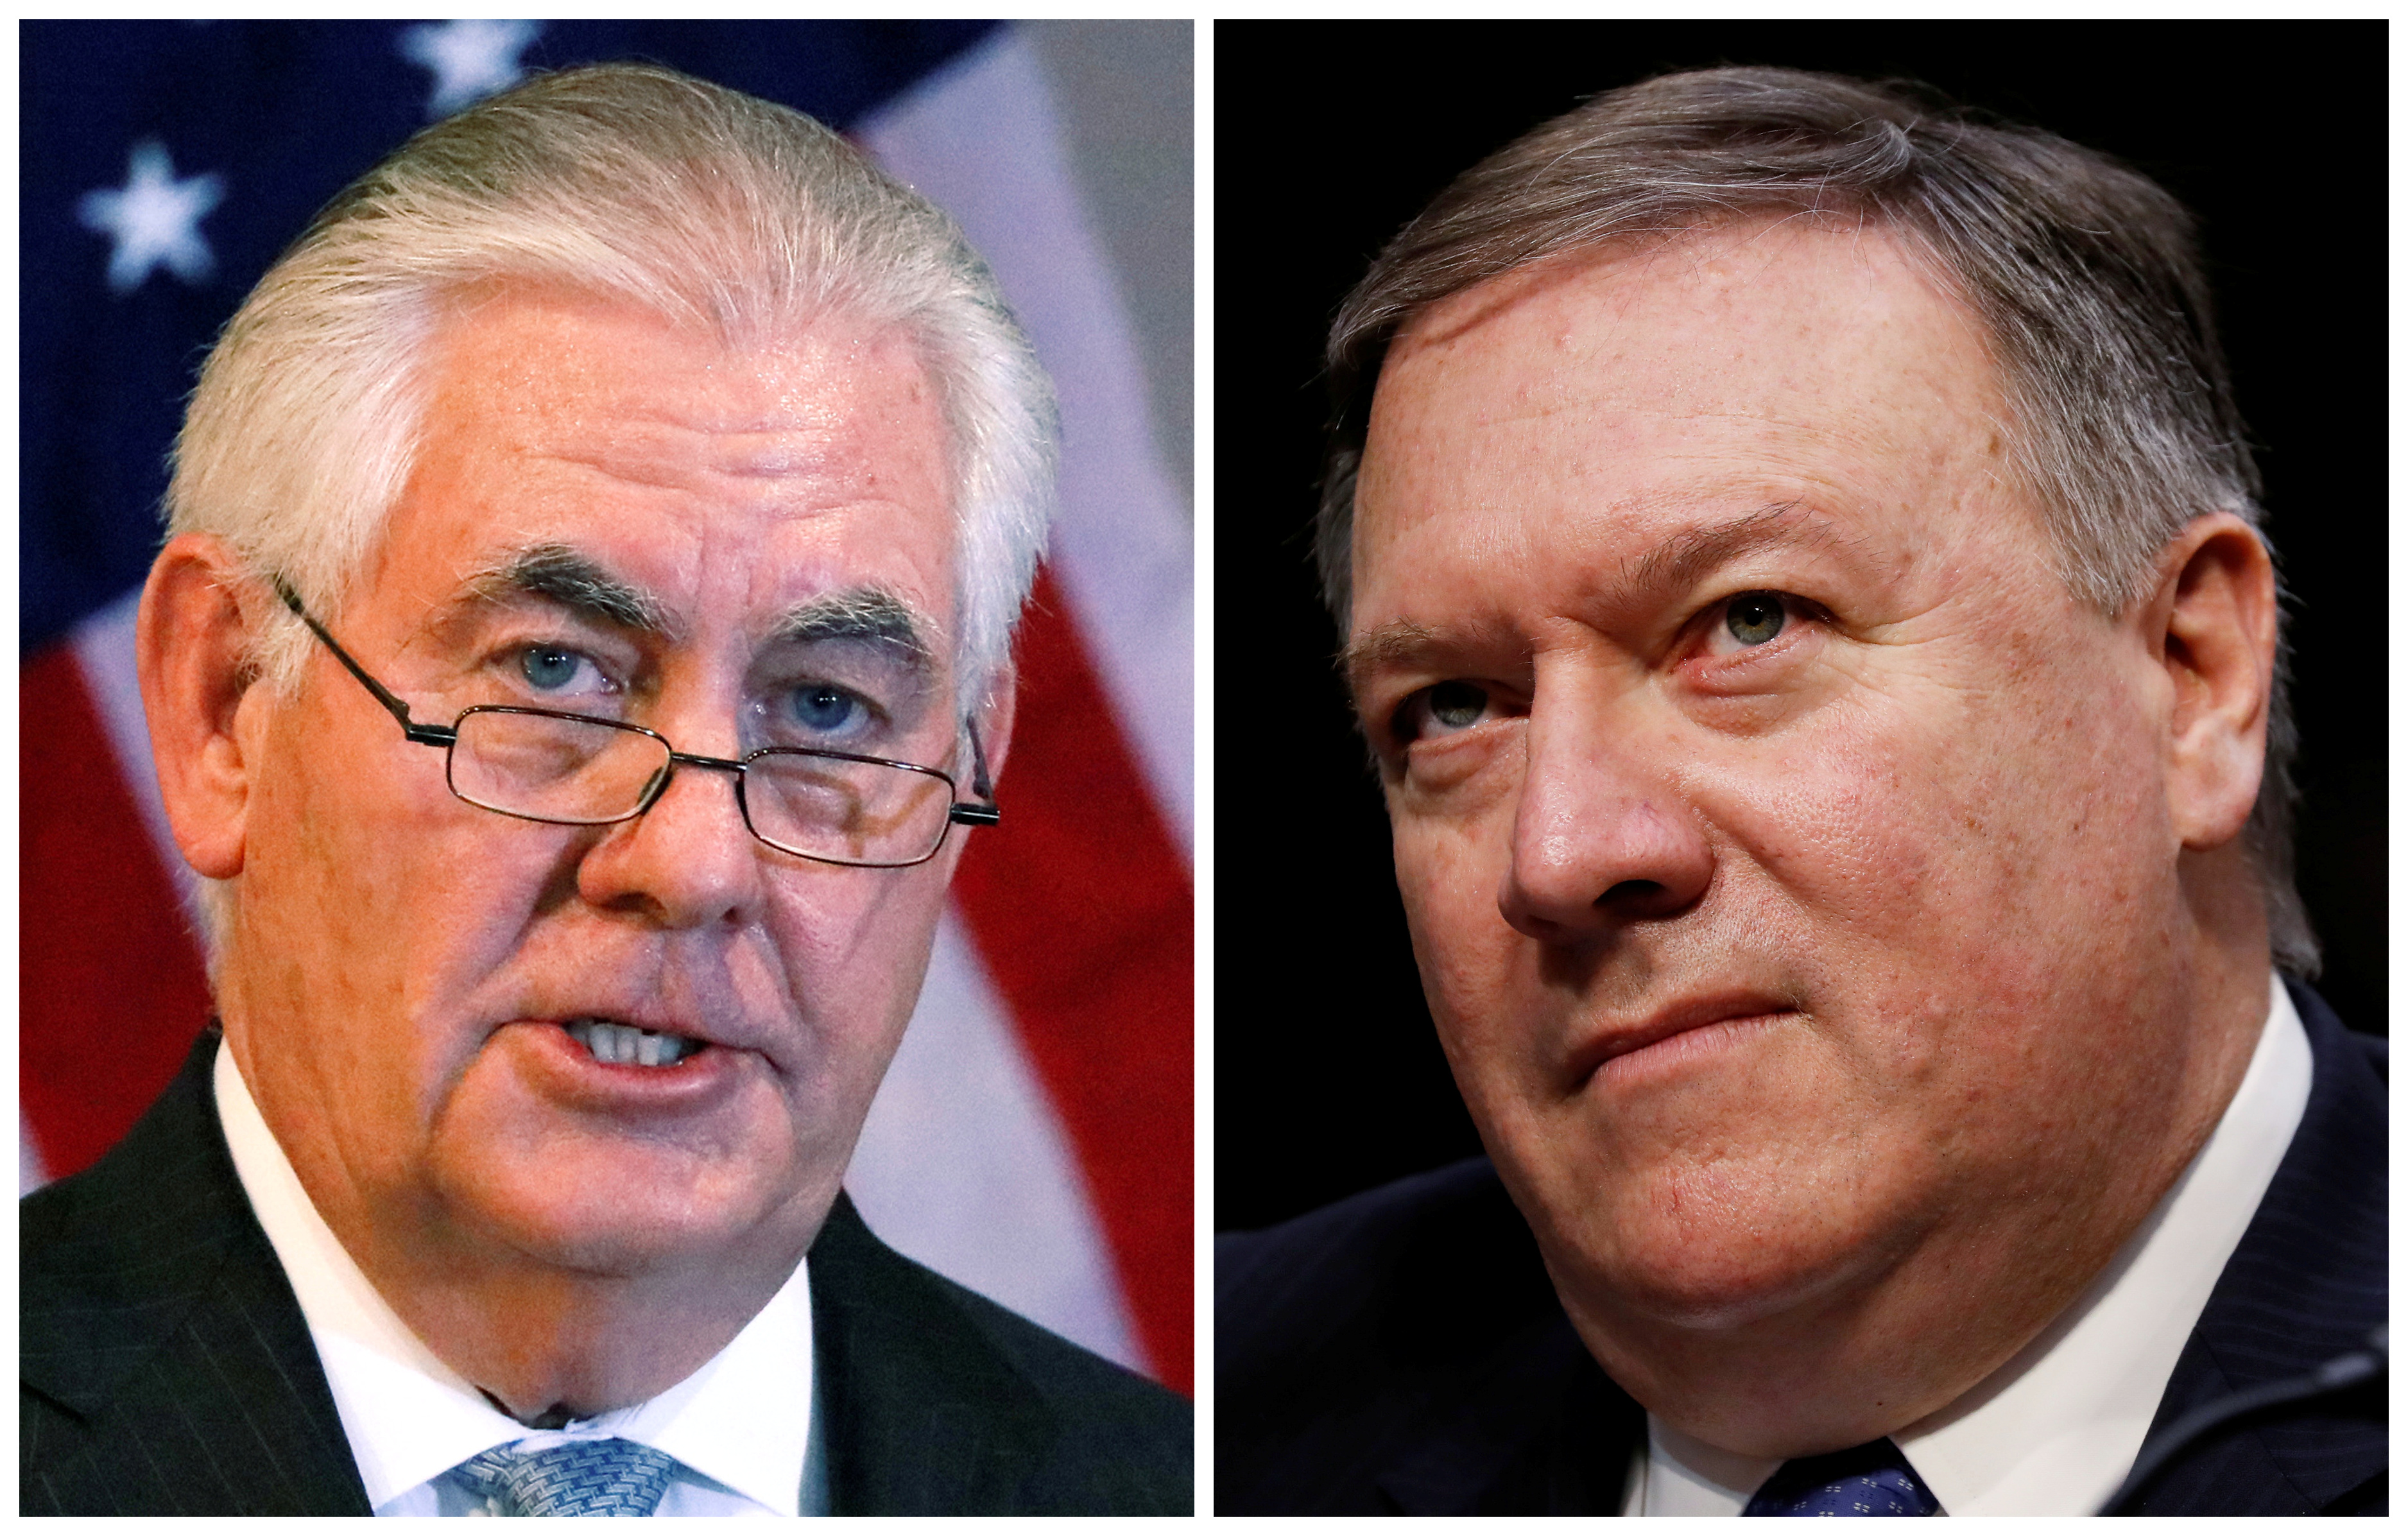 A combination photo shows U.S. Secretary of State Rex Tillerson (L) in Addis Ababa, Ethiopia, March 8, 2018, and CIA Director Mike Pompeo on Capitol Hill in Washington, DC, Feb. 13, 2018 respectively. (Reuters)